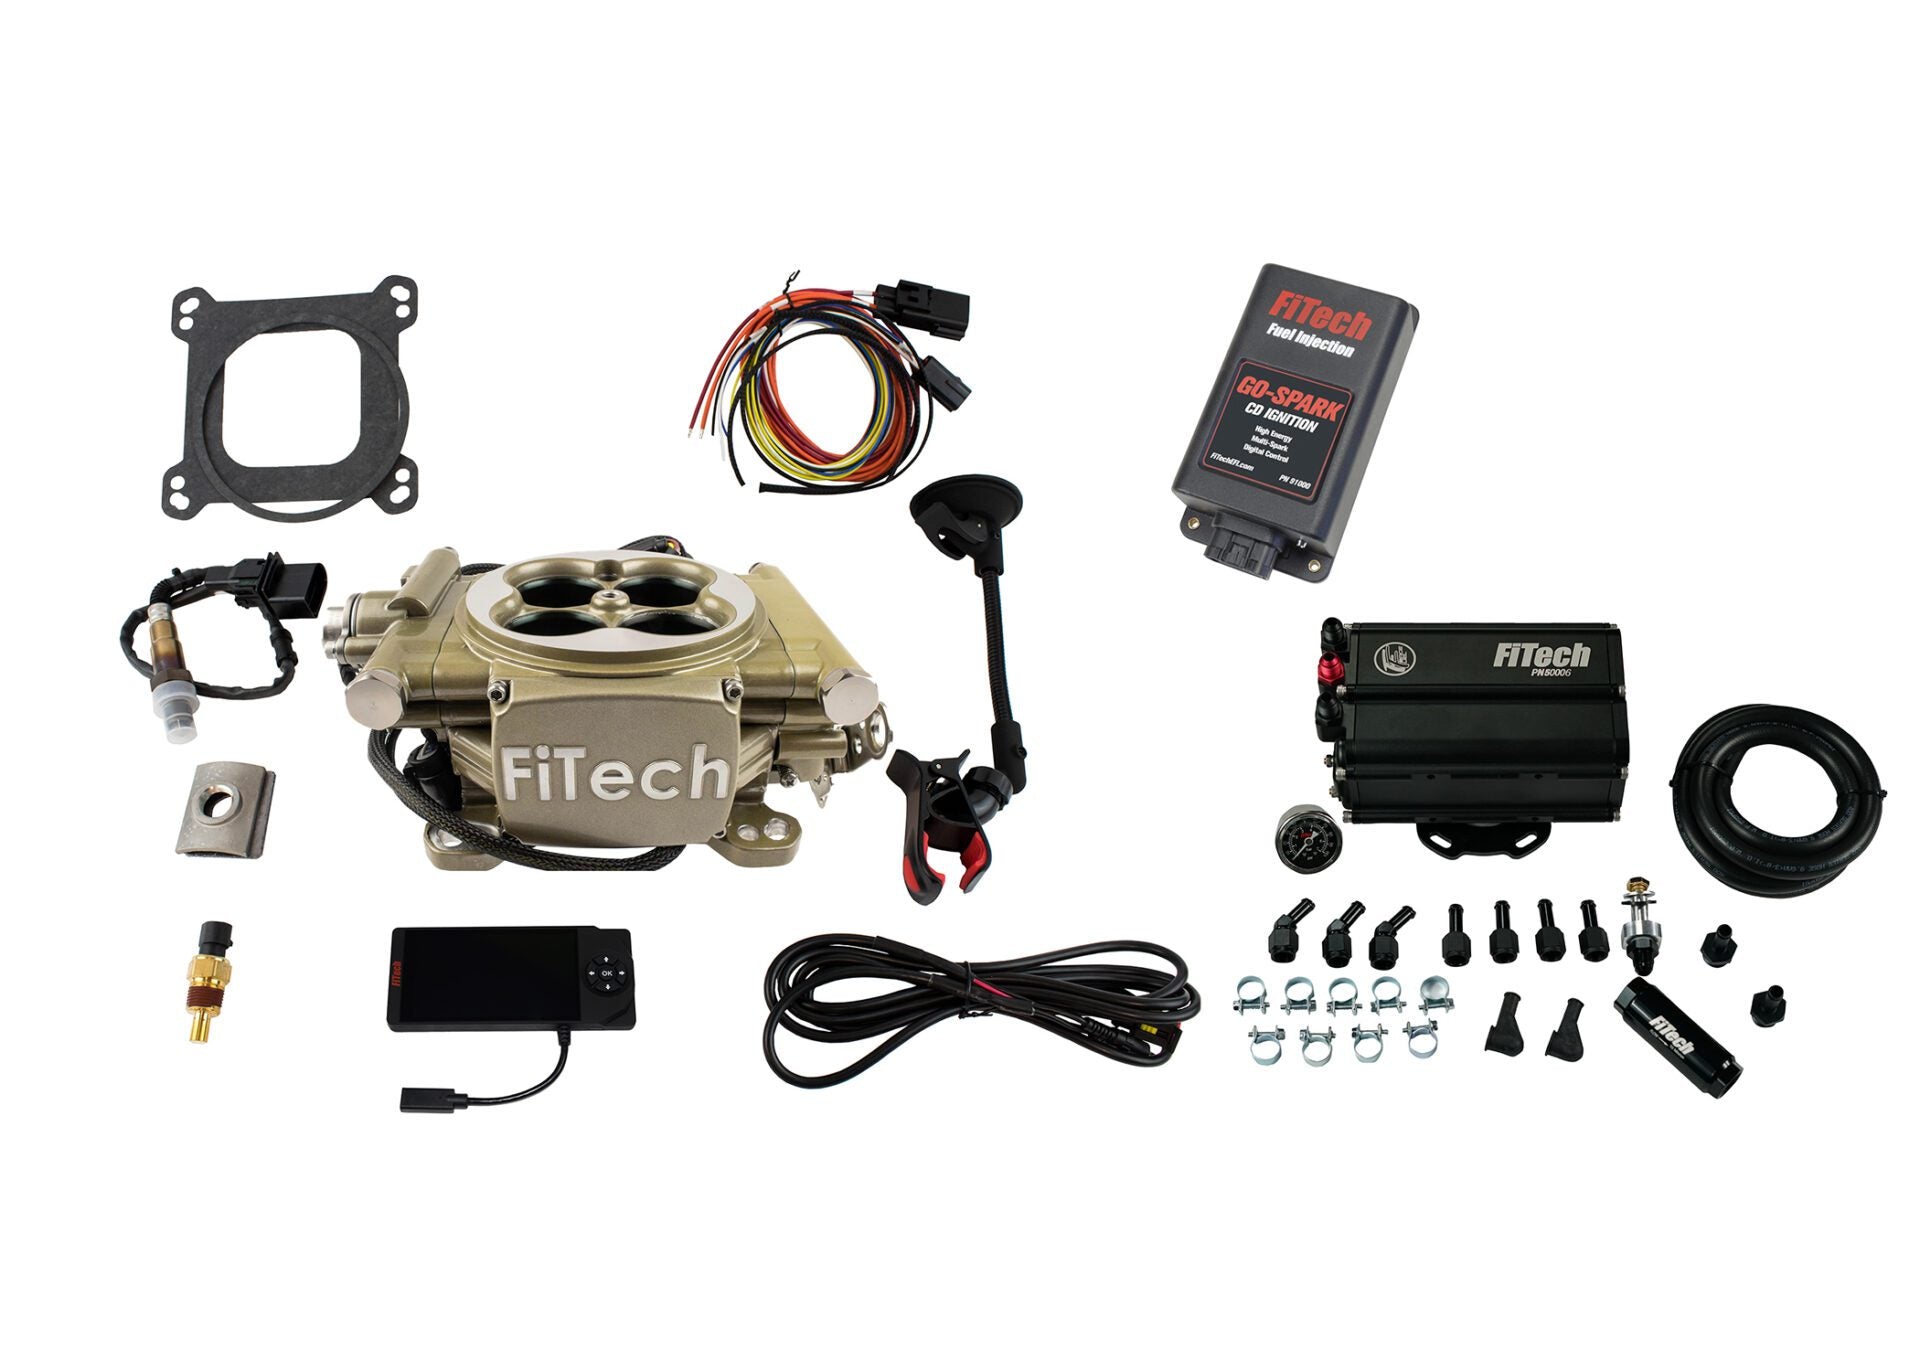 FiTech 93555 Easy Street 600 HP Classic Gold EFI Sys w/ Force Fuel Mini Delivery Master Kit